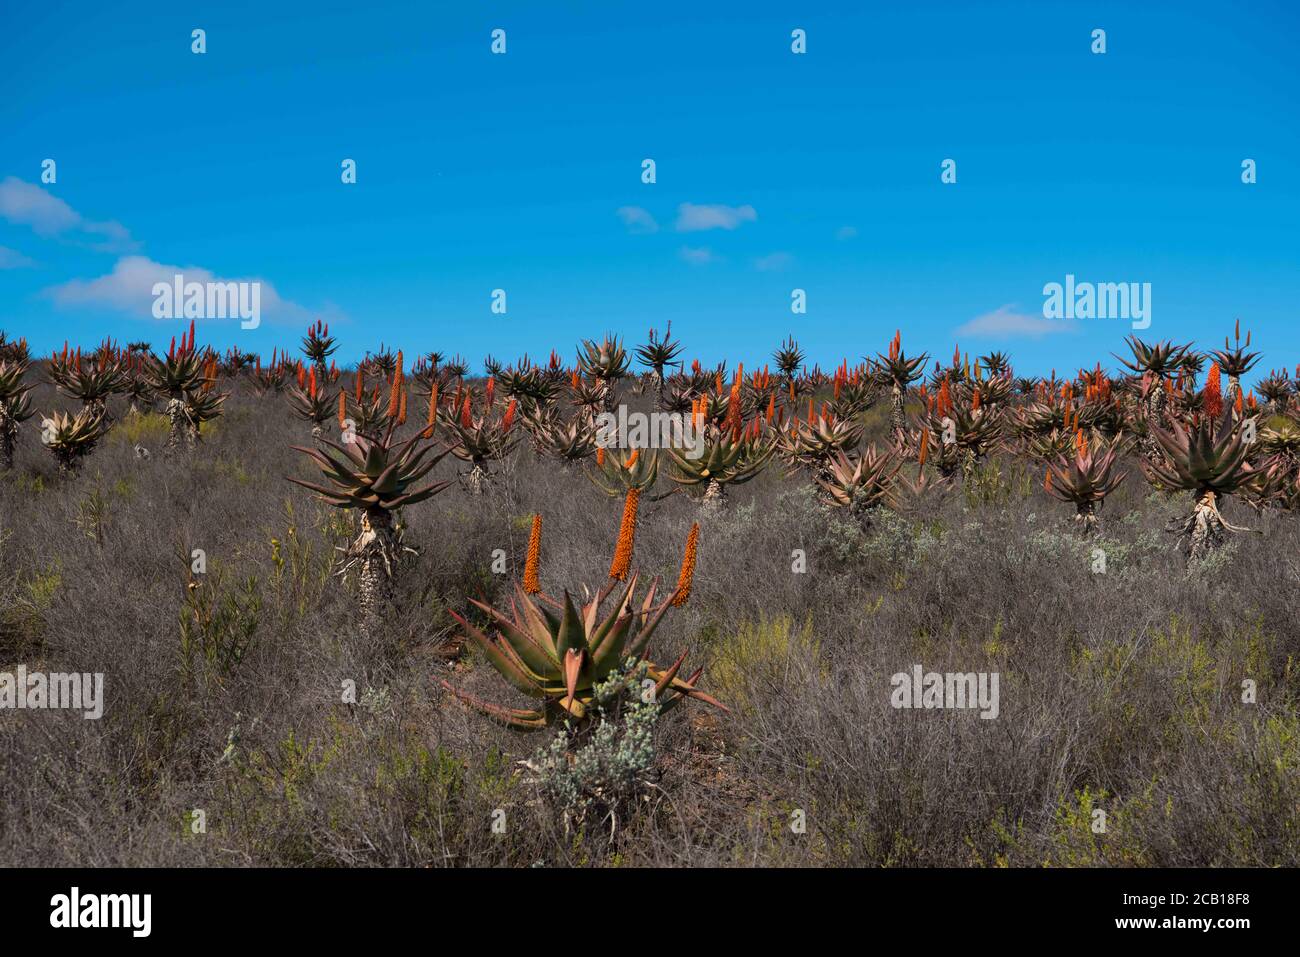 Aloe season in the Karoo flowering displaying red blossoms and beautiful landscape Stock Photo